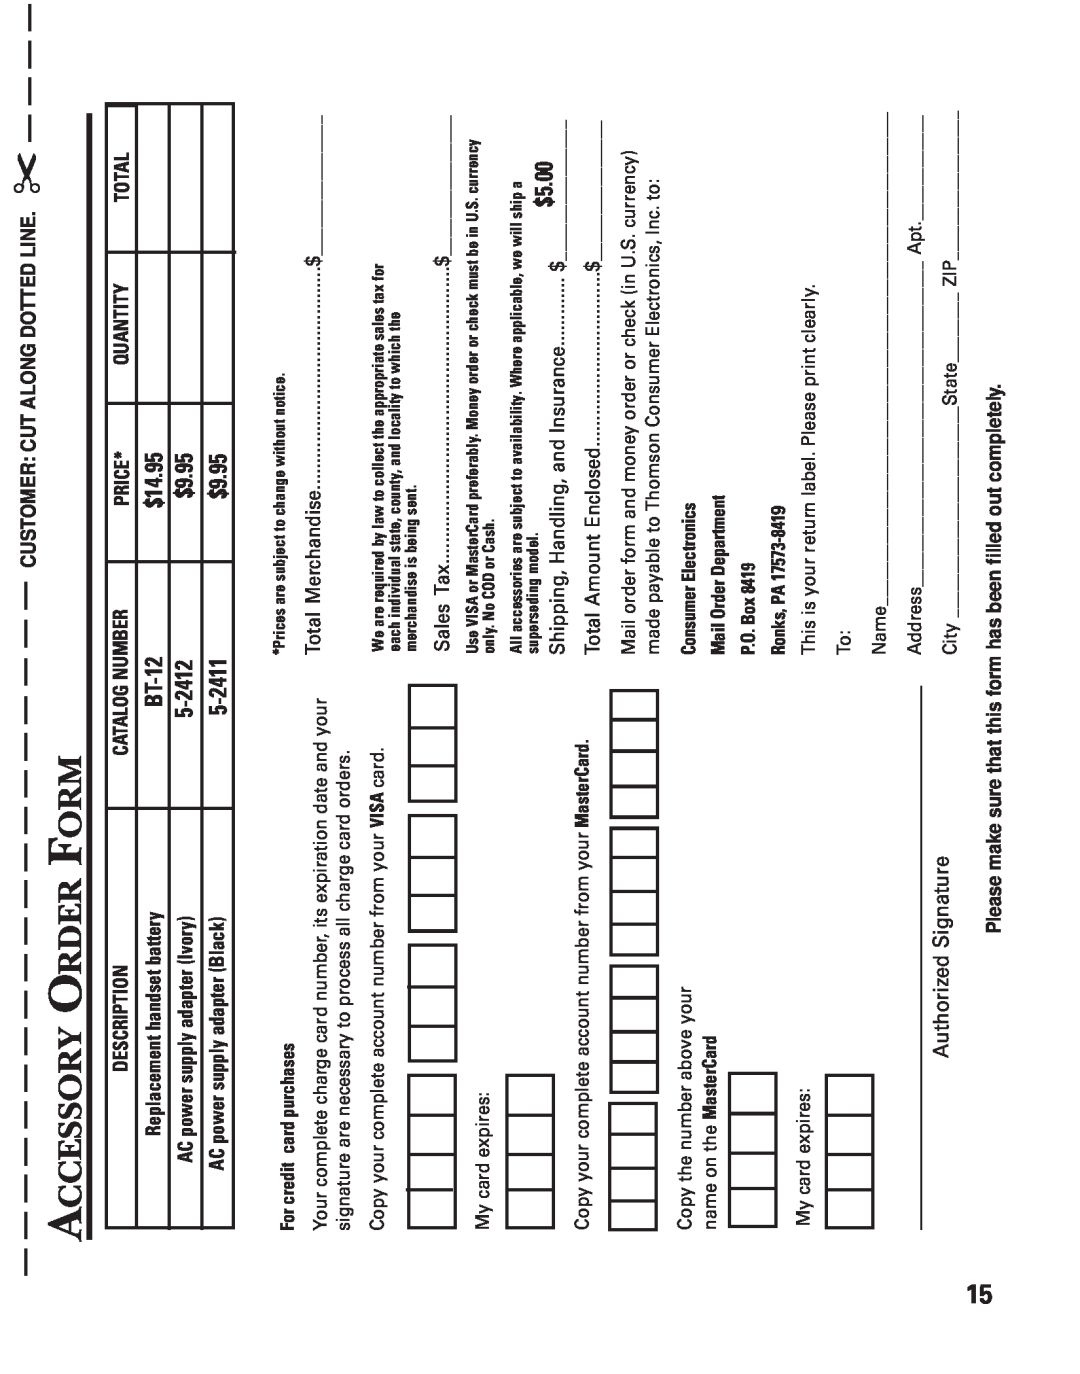 GE 2-9753 Accessory Order Form, BT-12, $14.95, 5-2412, $9.95, 5-2411, Signature Authorized, For credit card purchases 